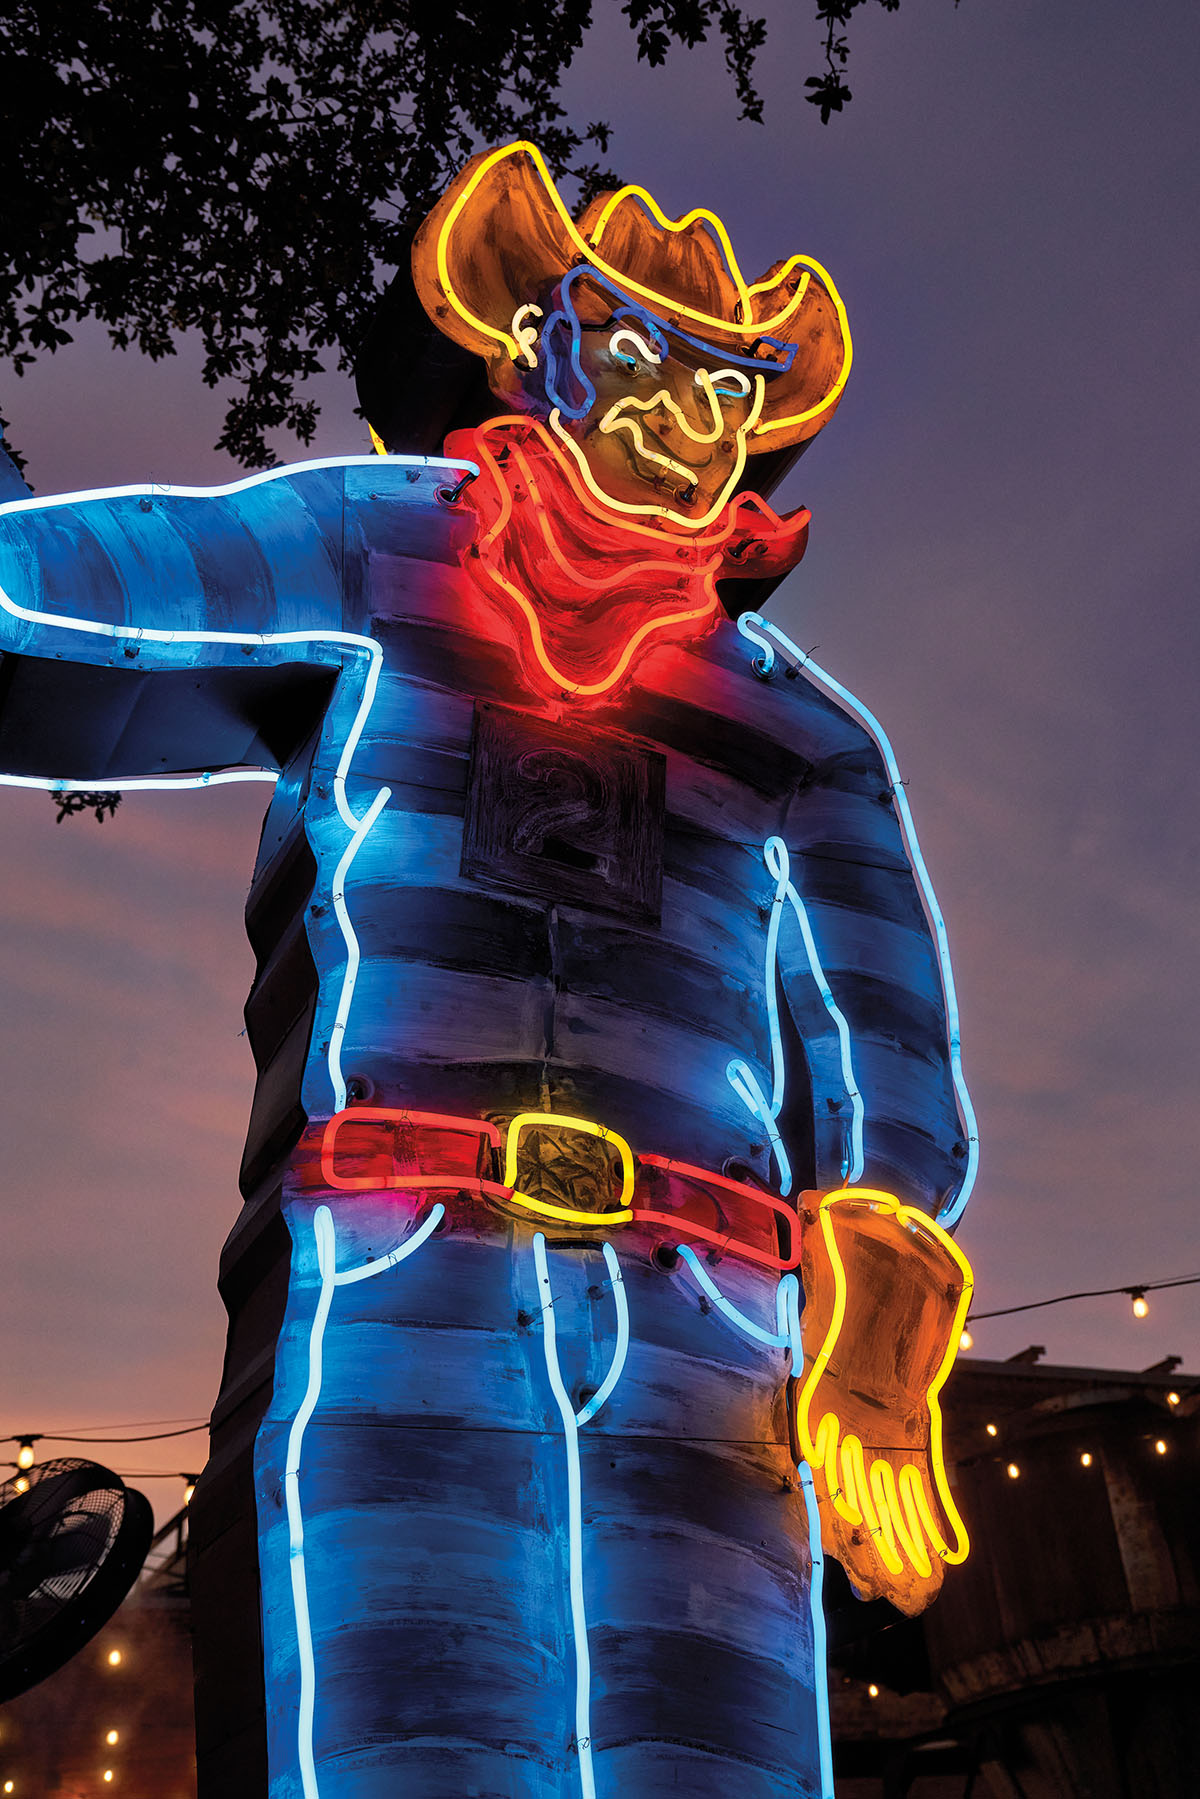 A neon sculpture with red, blue and yellow in the shape of a cowboy